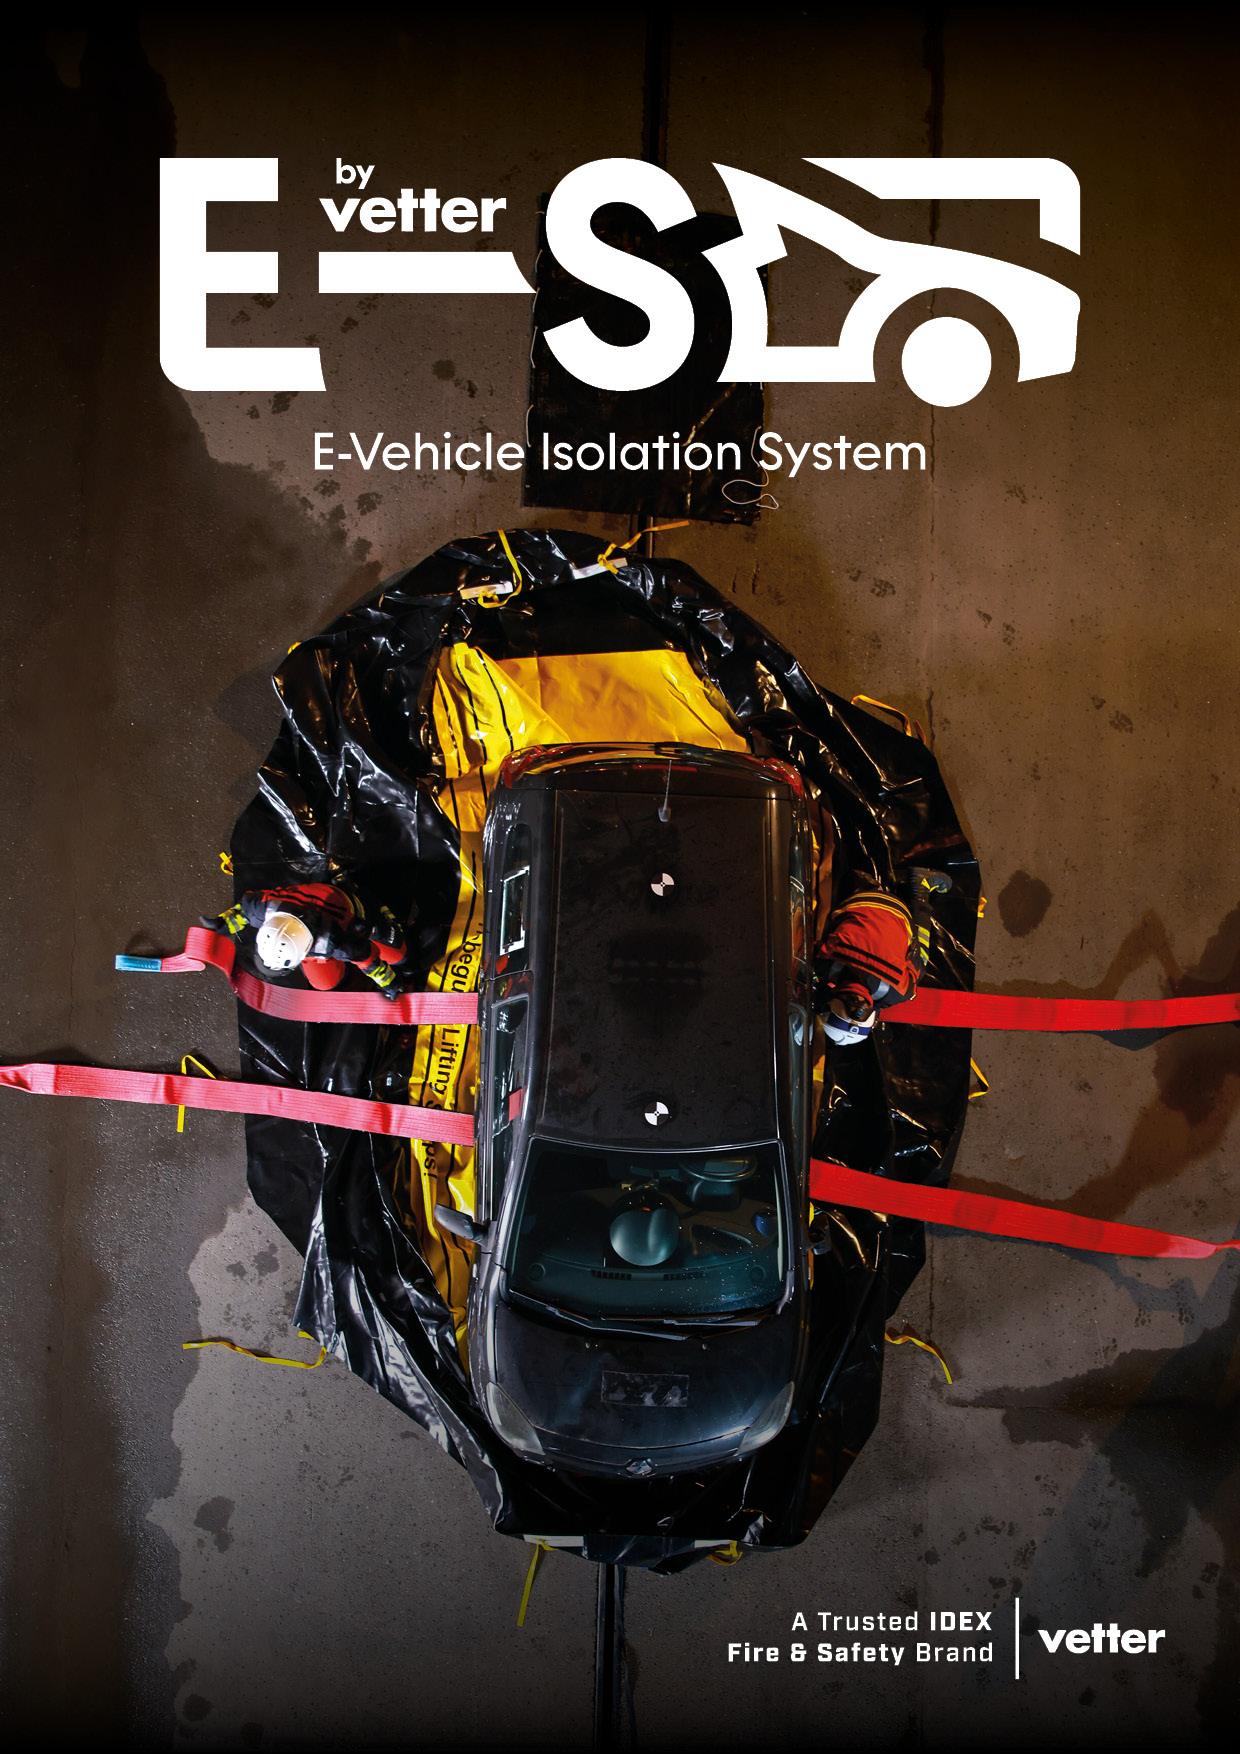 E-Vehicle Isolation System, Vehicle Recovery, Branchenlösungen